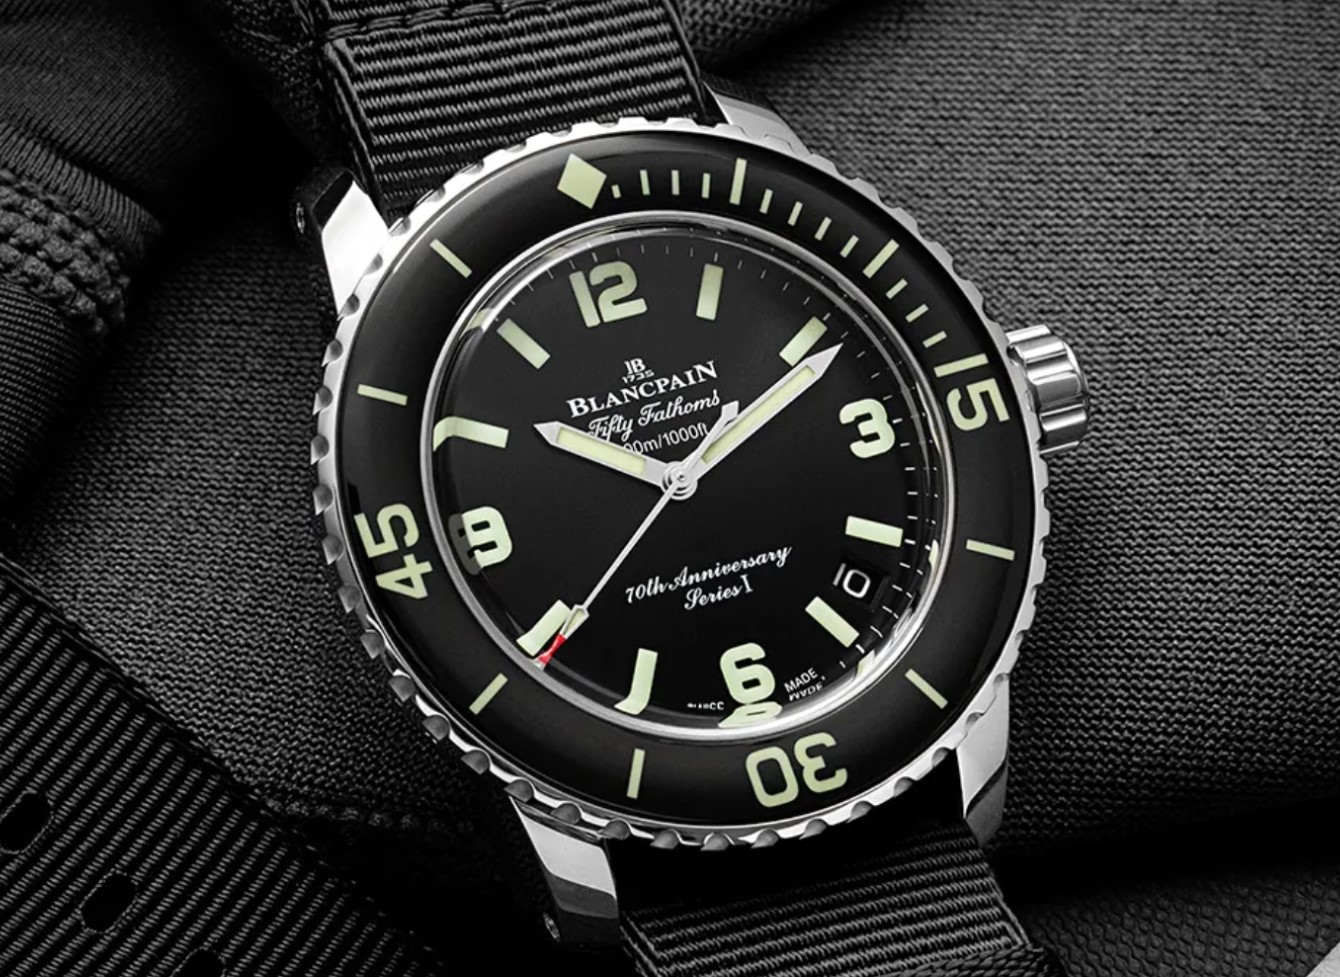 Blancpain Fifty Fathoms 70th Annviersary Limited